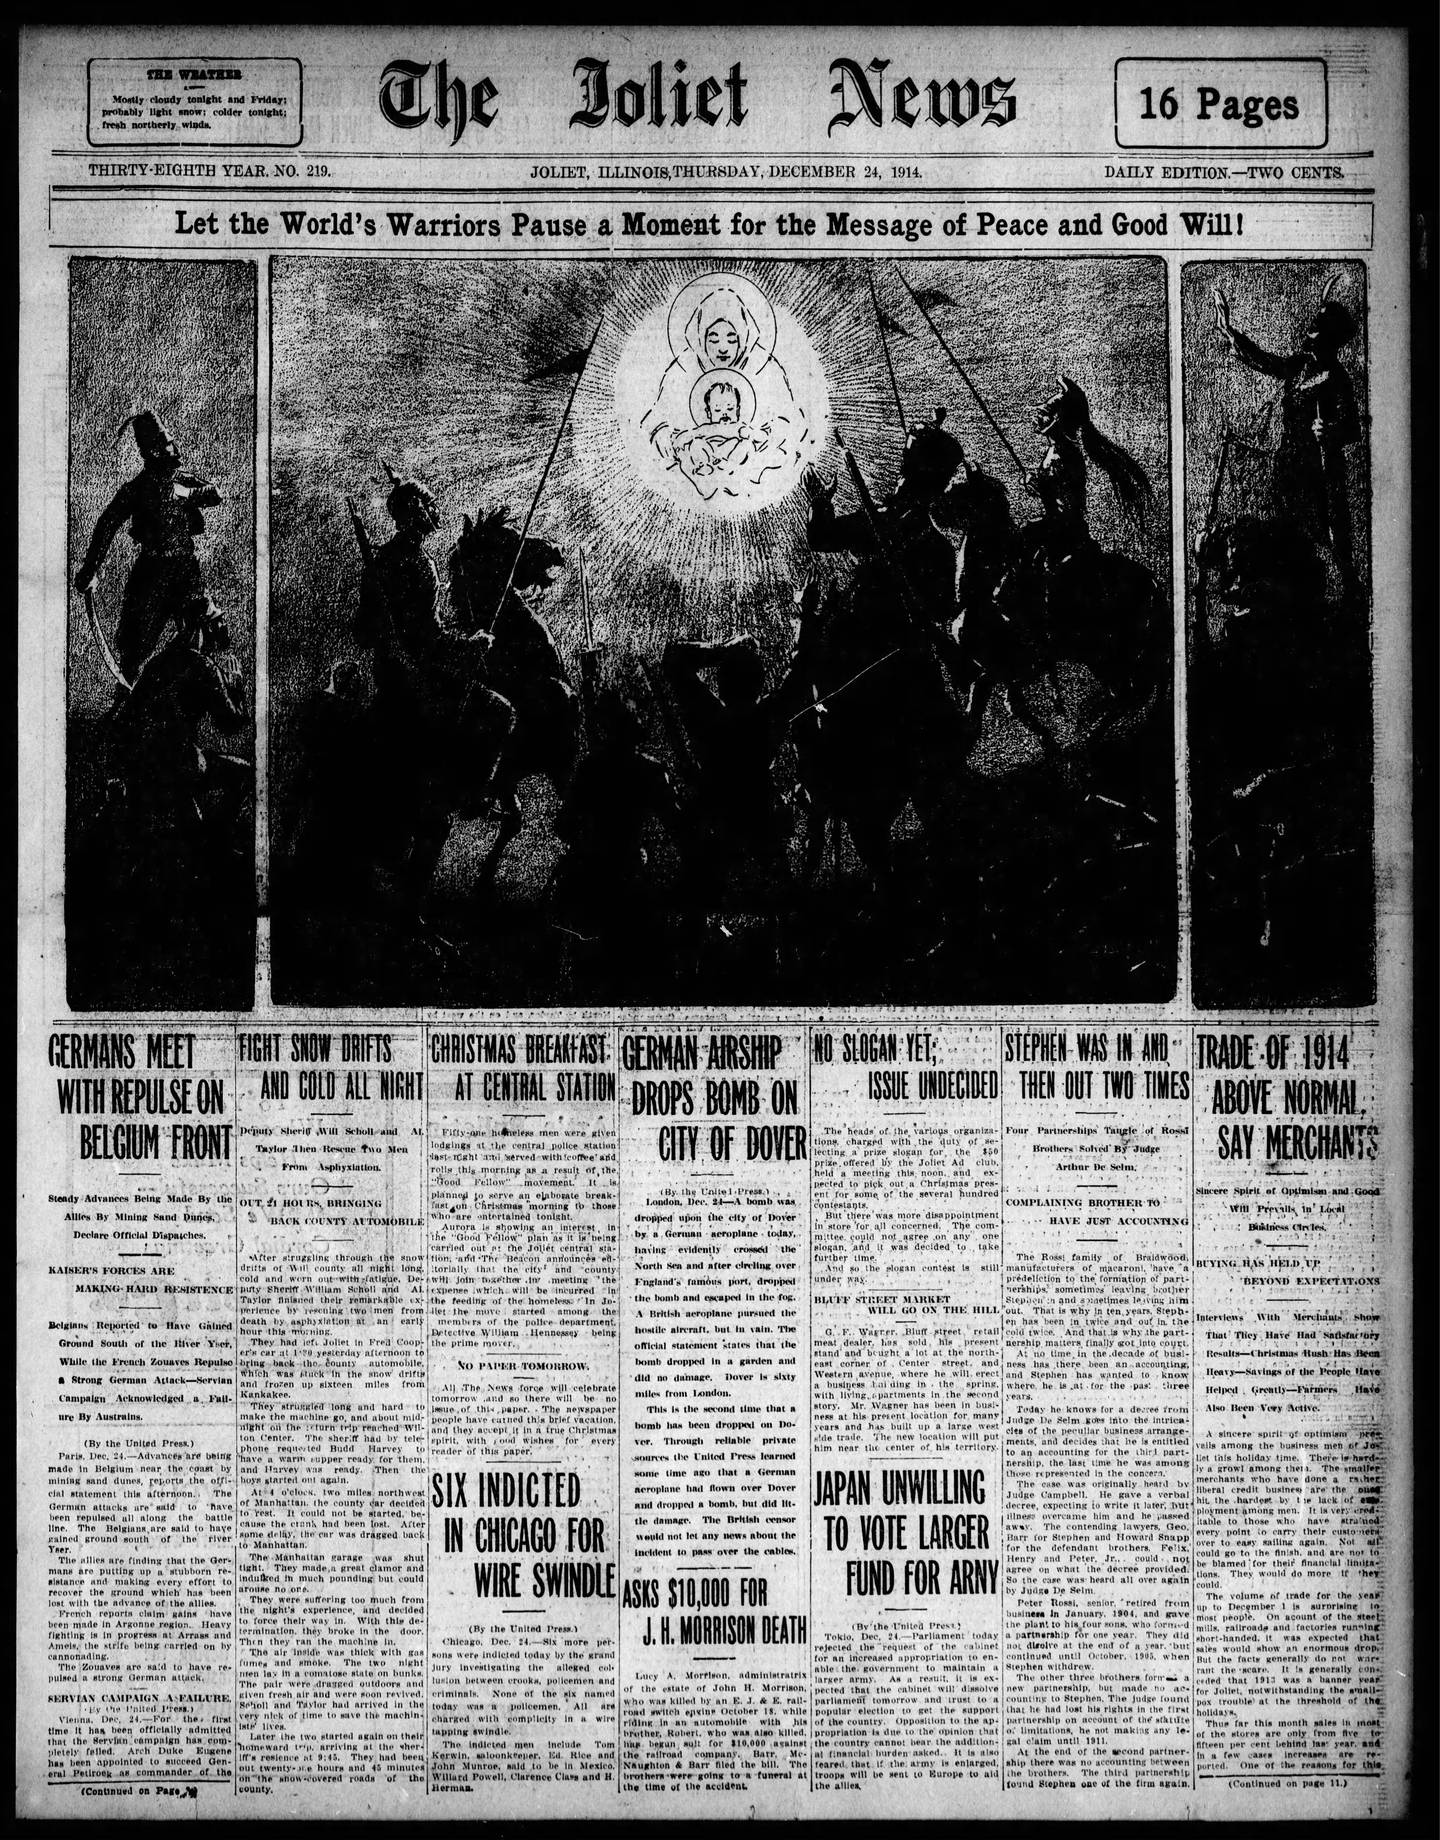 The Herald News
Joliet. Front page. Thursday, December 24, 1914